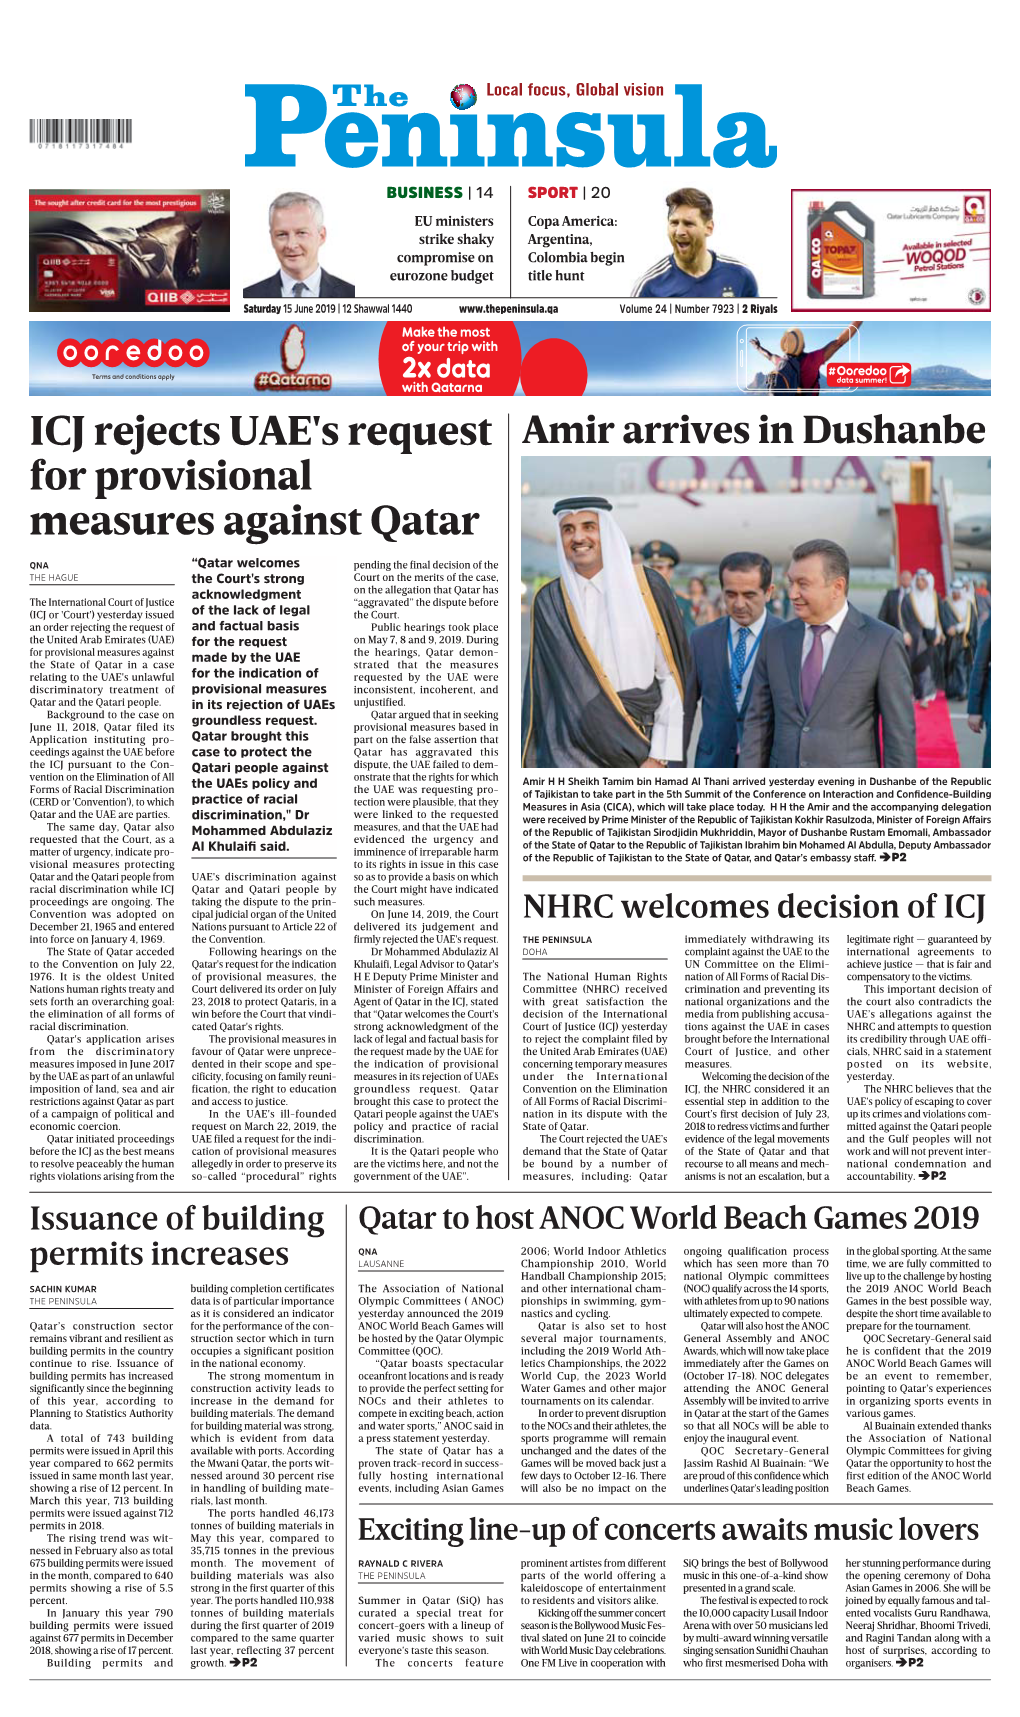 ICJ Rejects UAE's Request for Provisional Measures Against Qatar